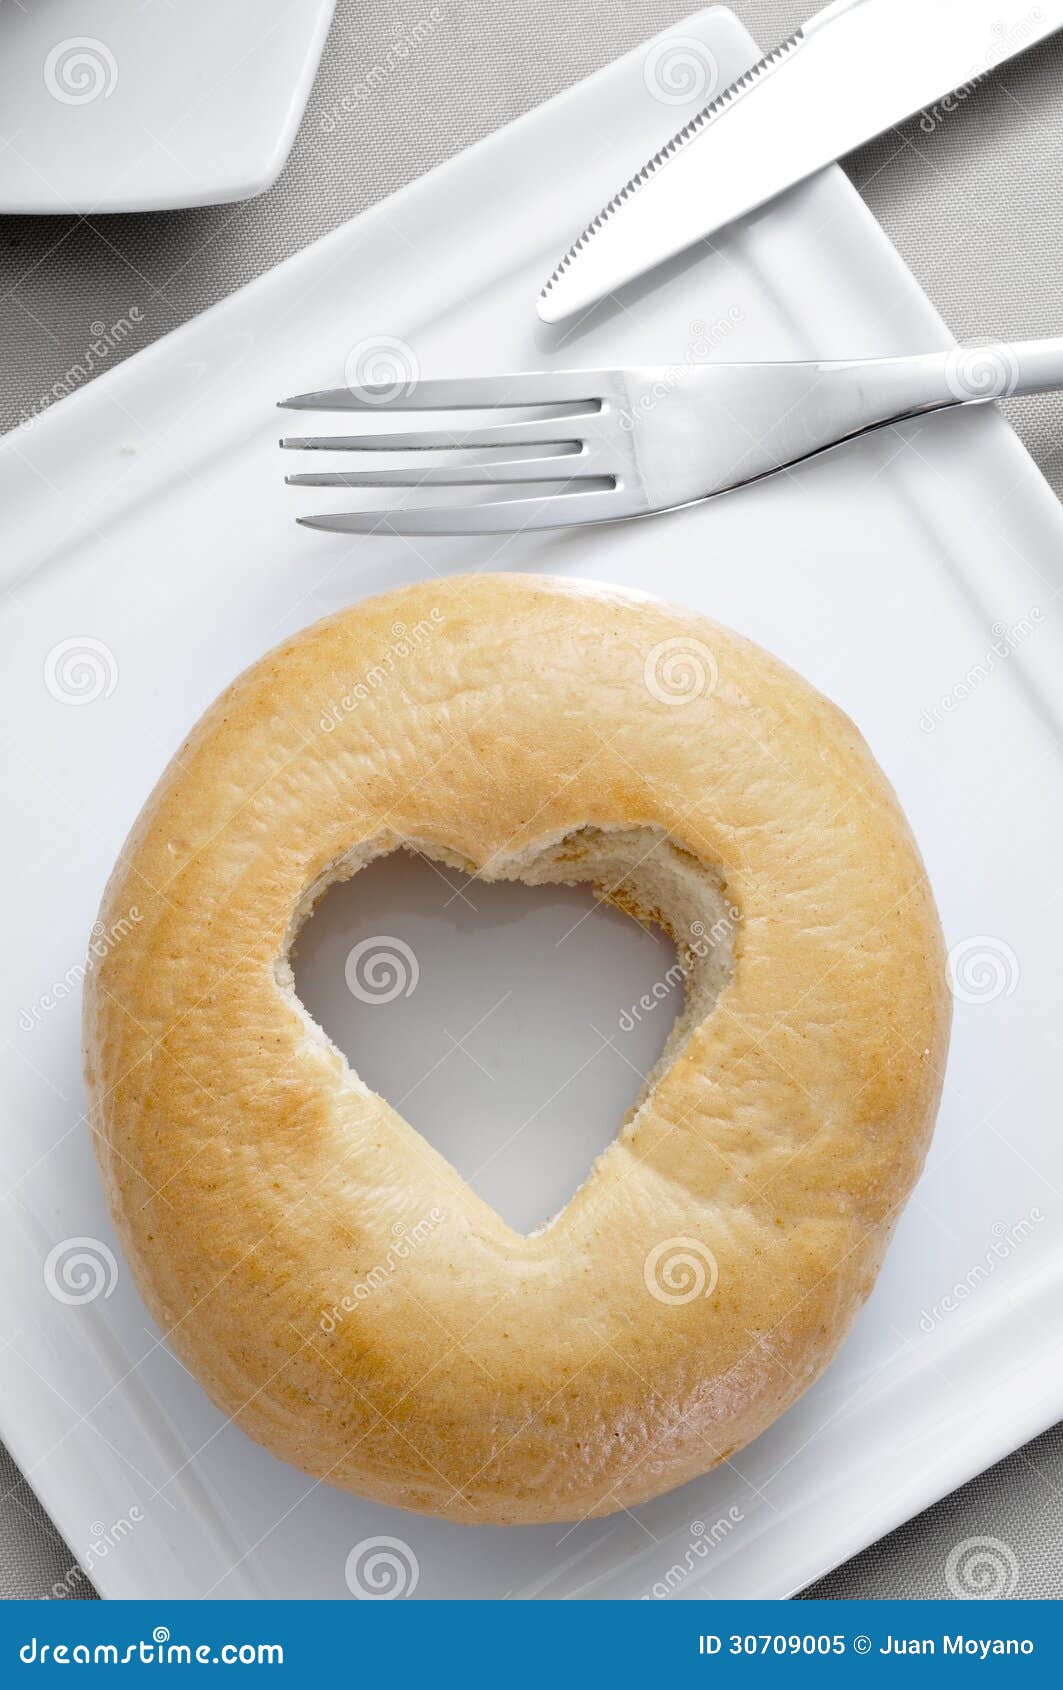 Bagel With A Heart-shaped Hole Stock Image - Image: 30709005